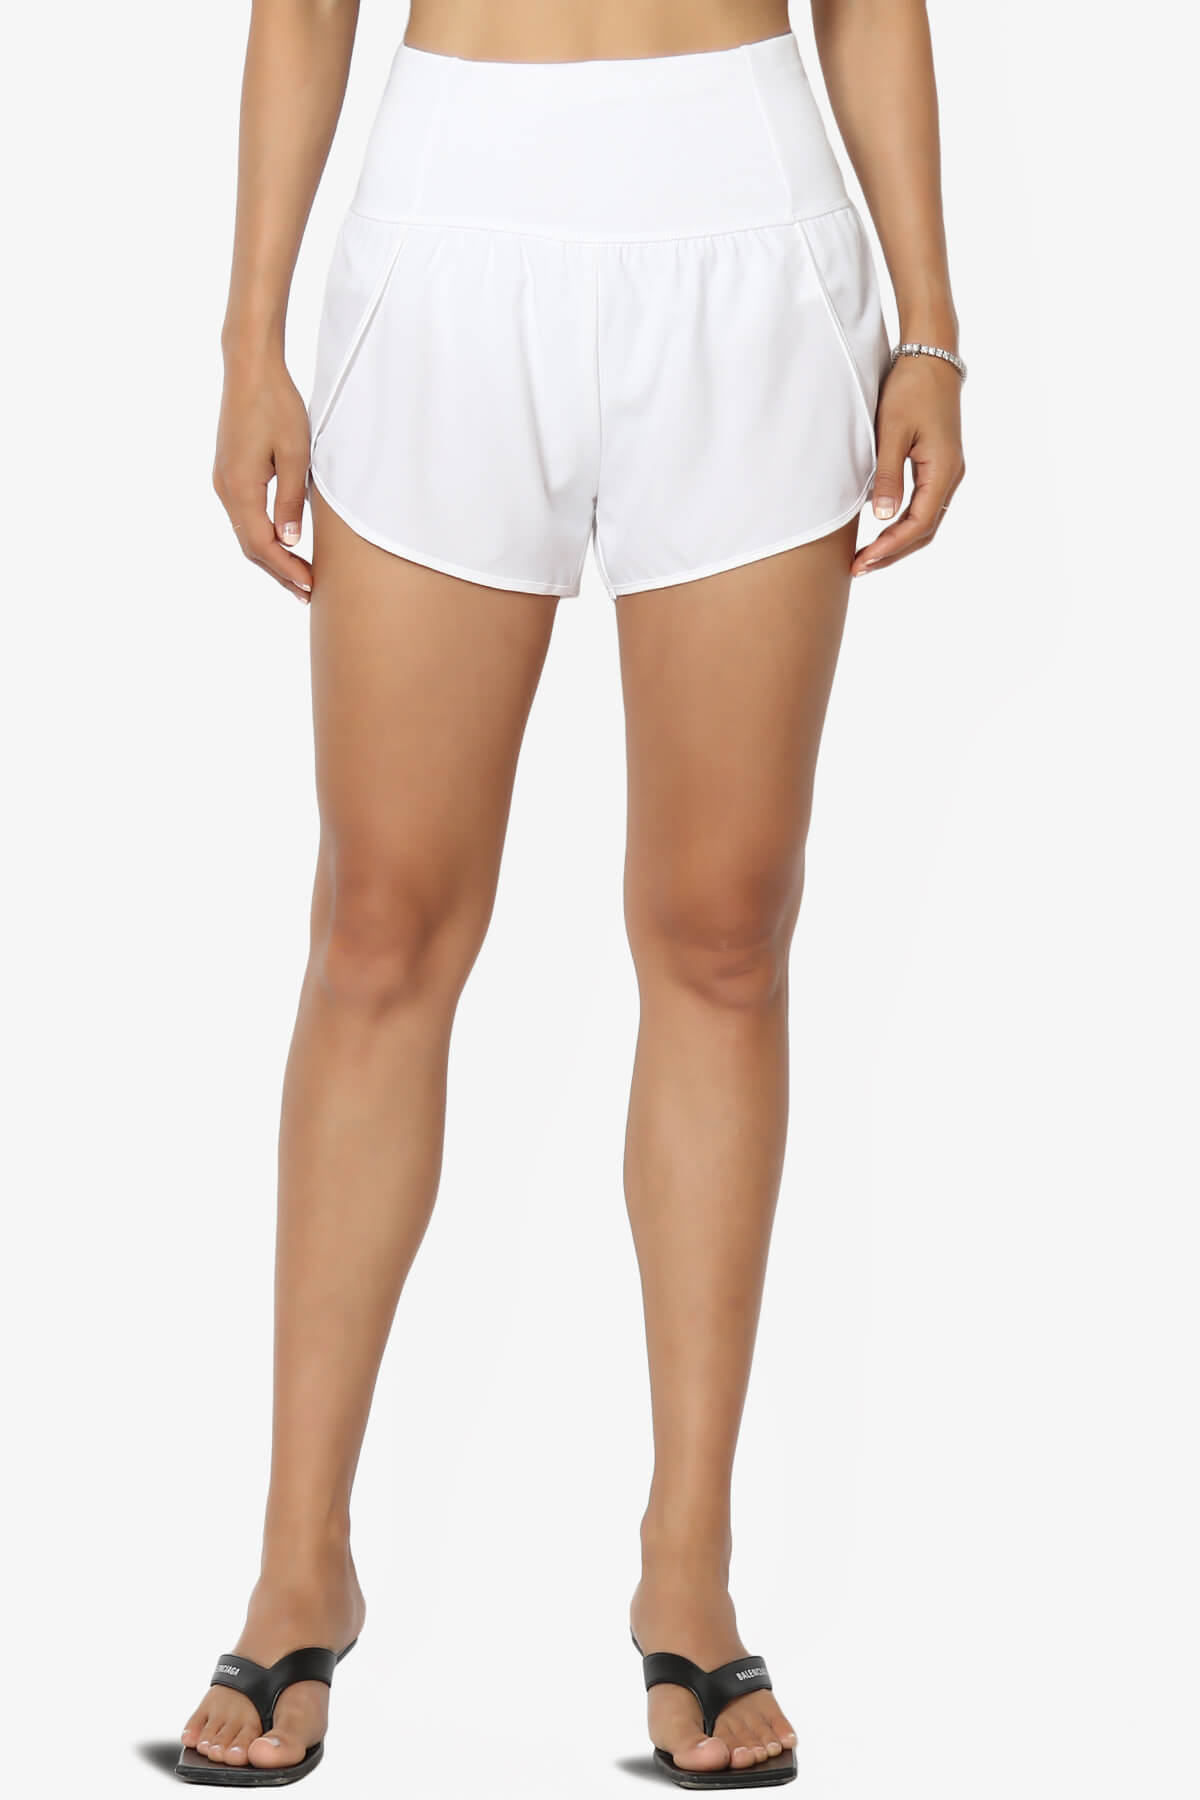 Manzie Track And Field Brief Lined Running Shorts WHITE_1